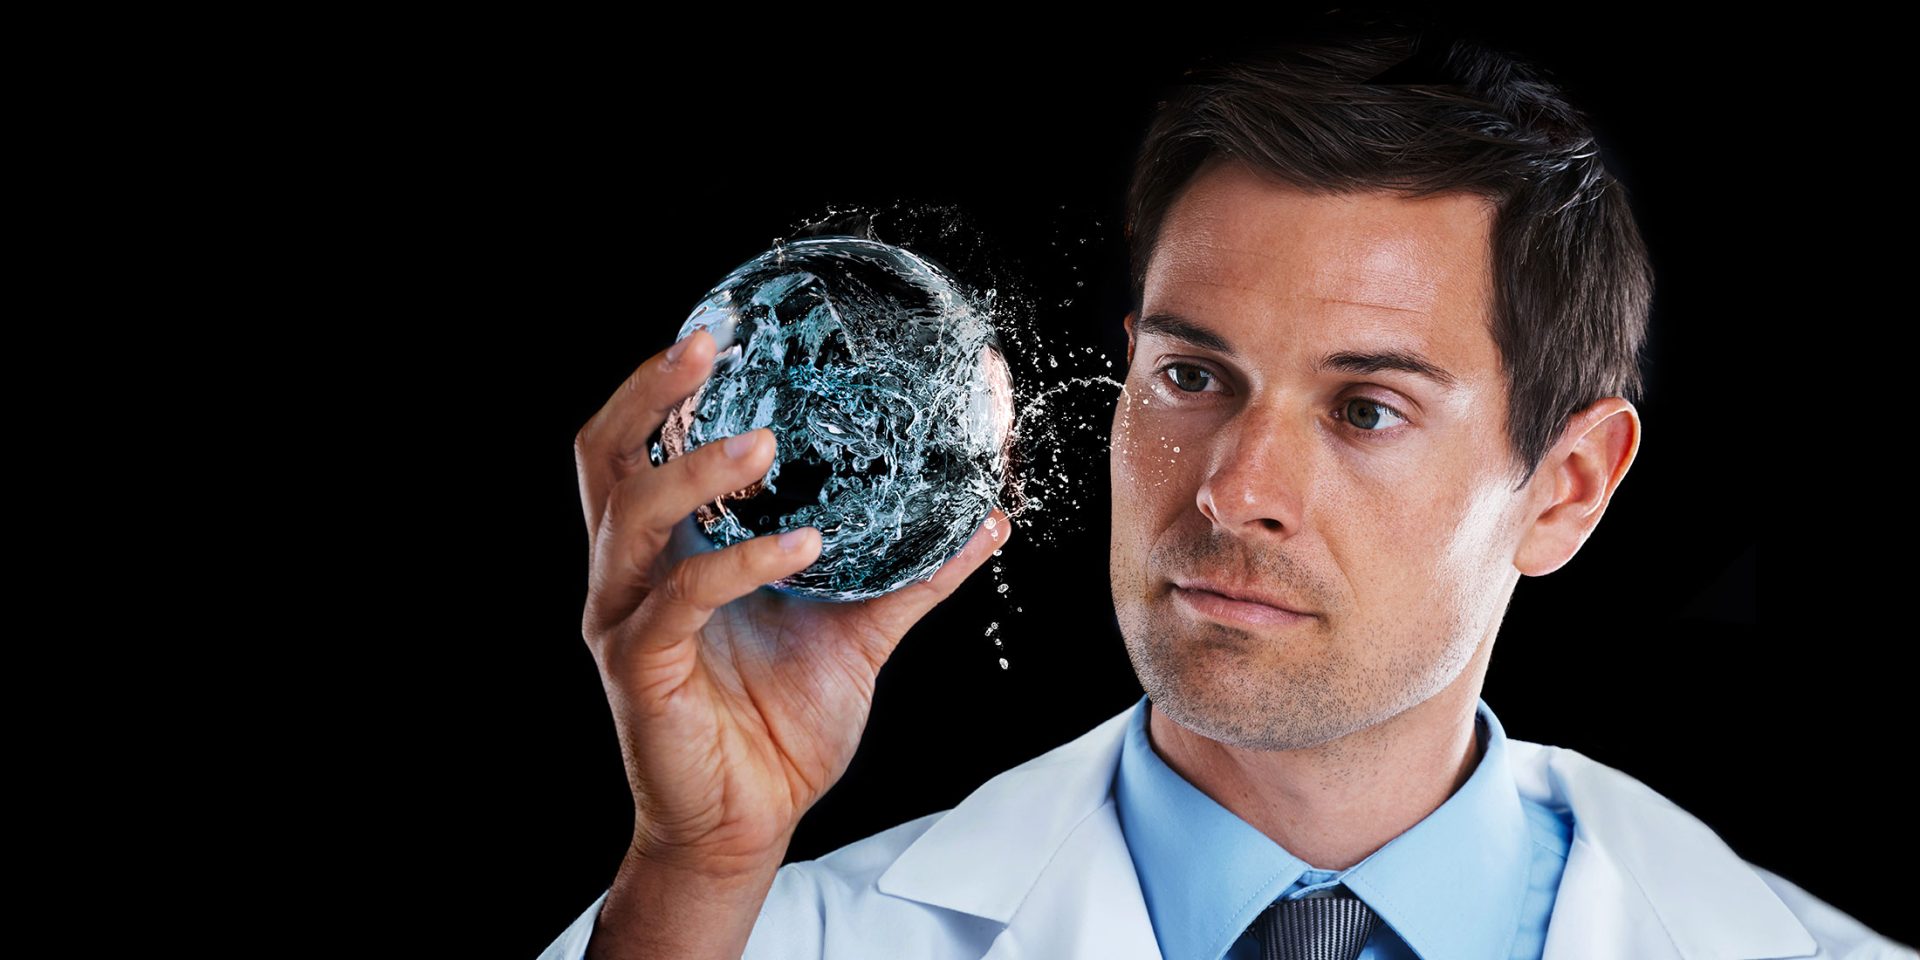 Image Of Employee Holding A Ball Of Water For Our Commercial Water 